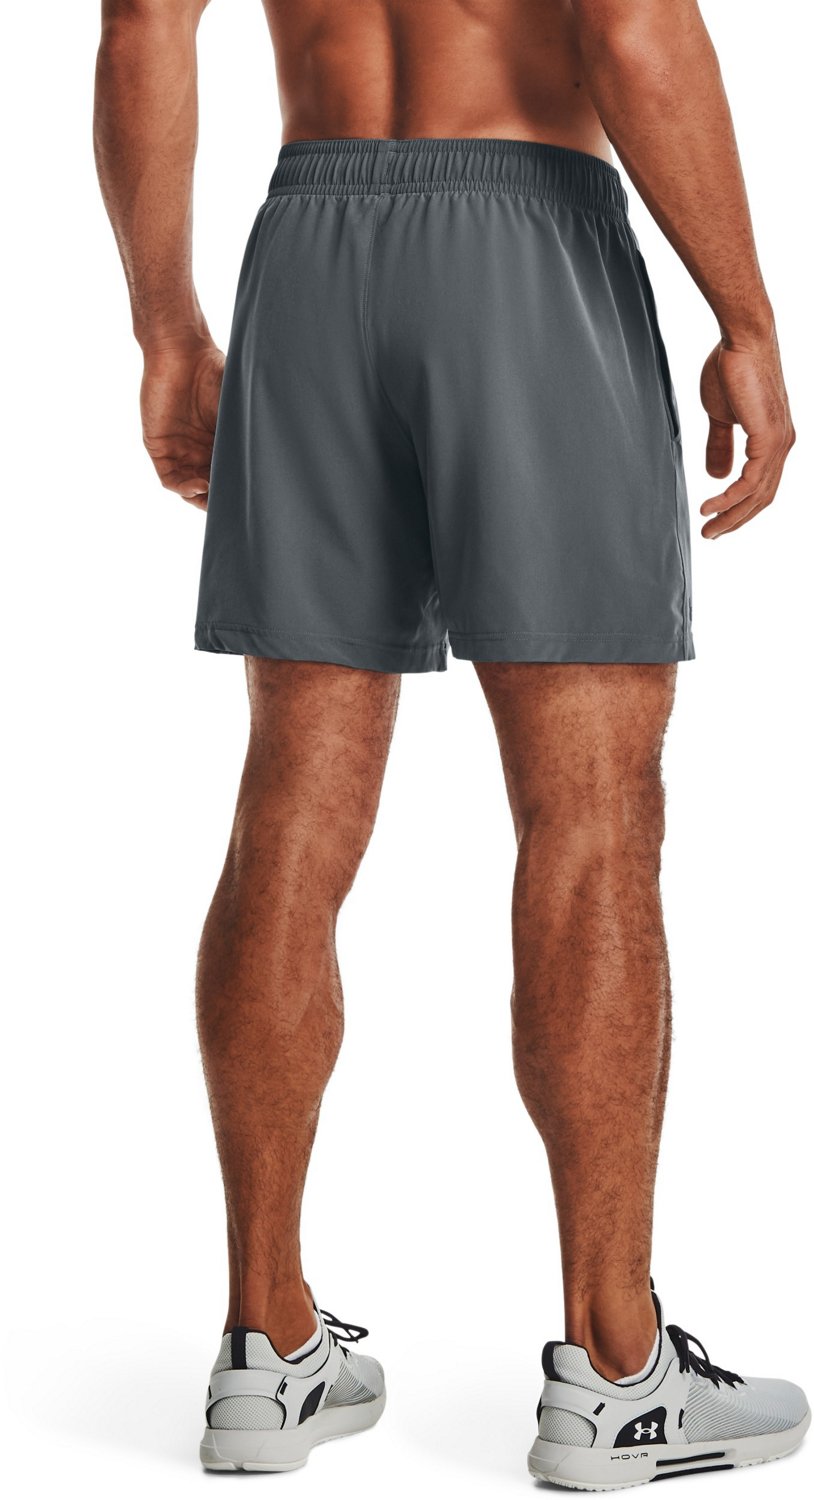 Under Armour Men's Woven Shorts 7 in | Free Shipping at Academy